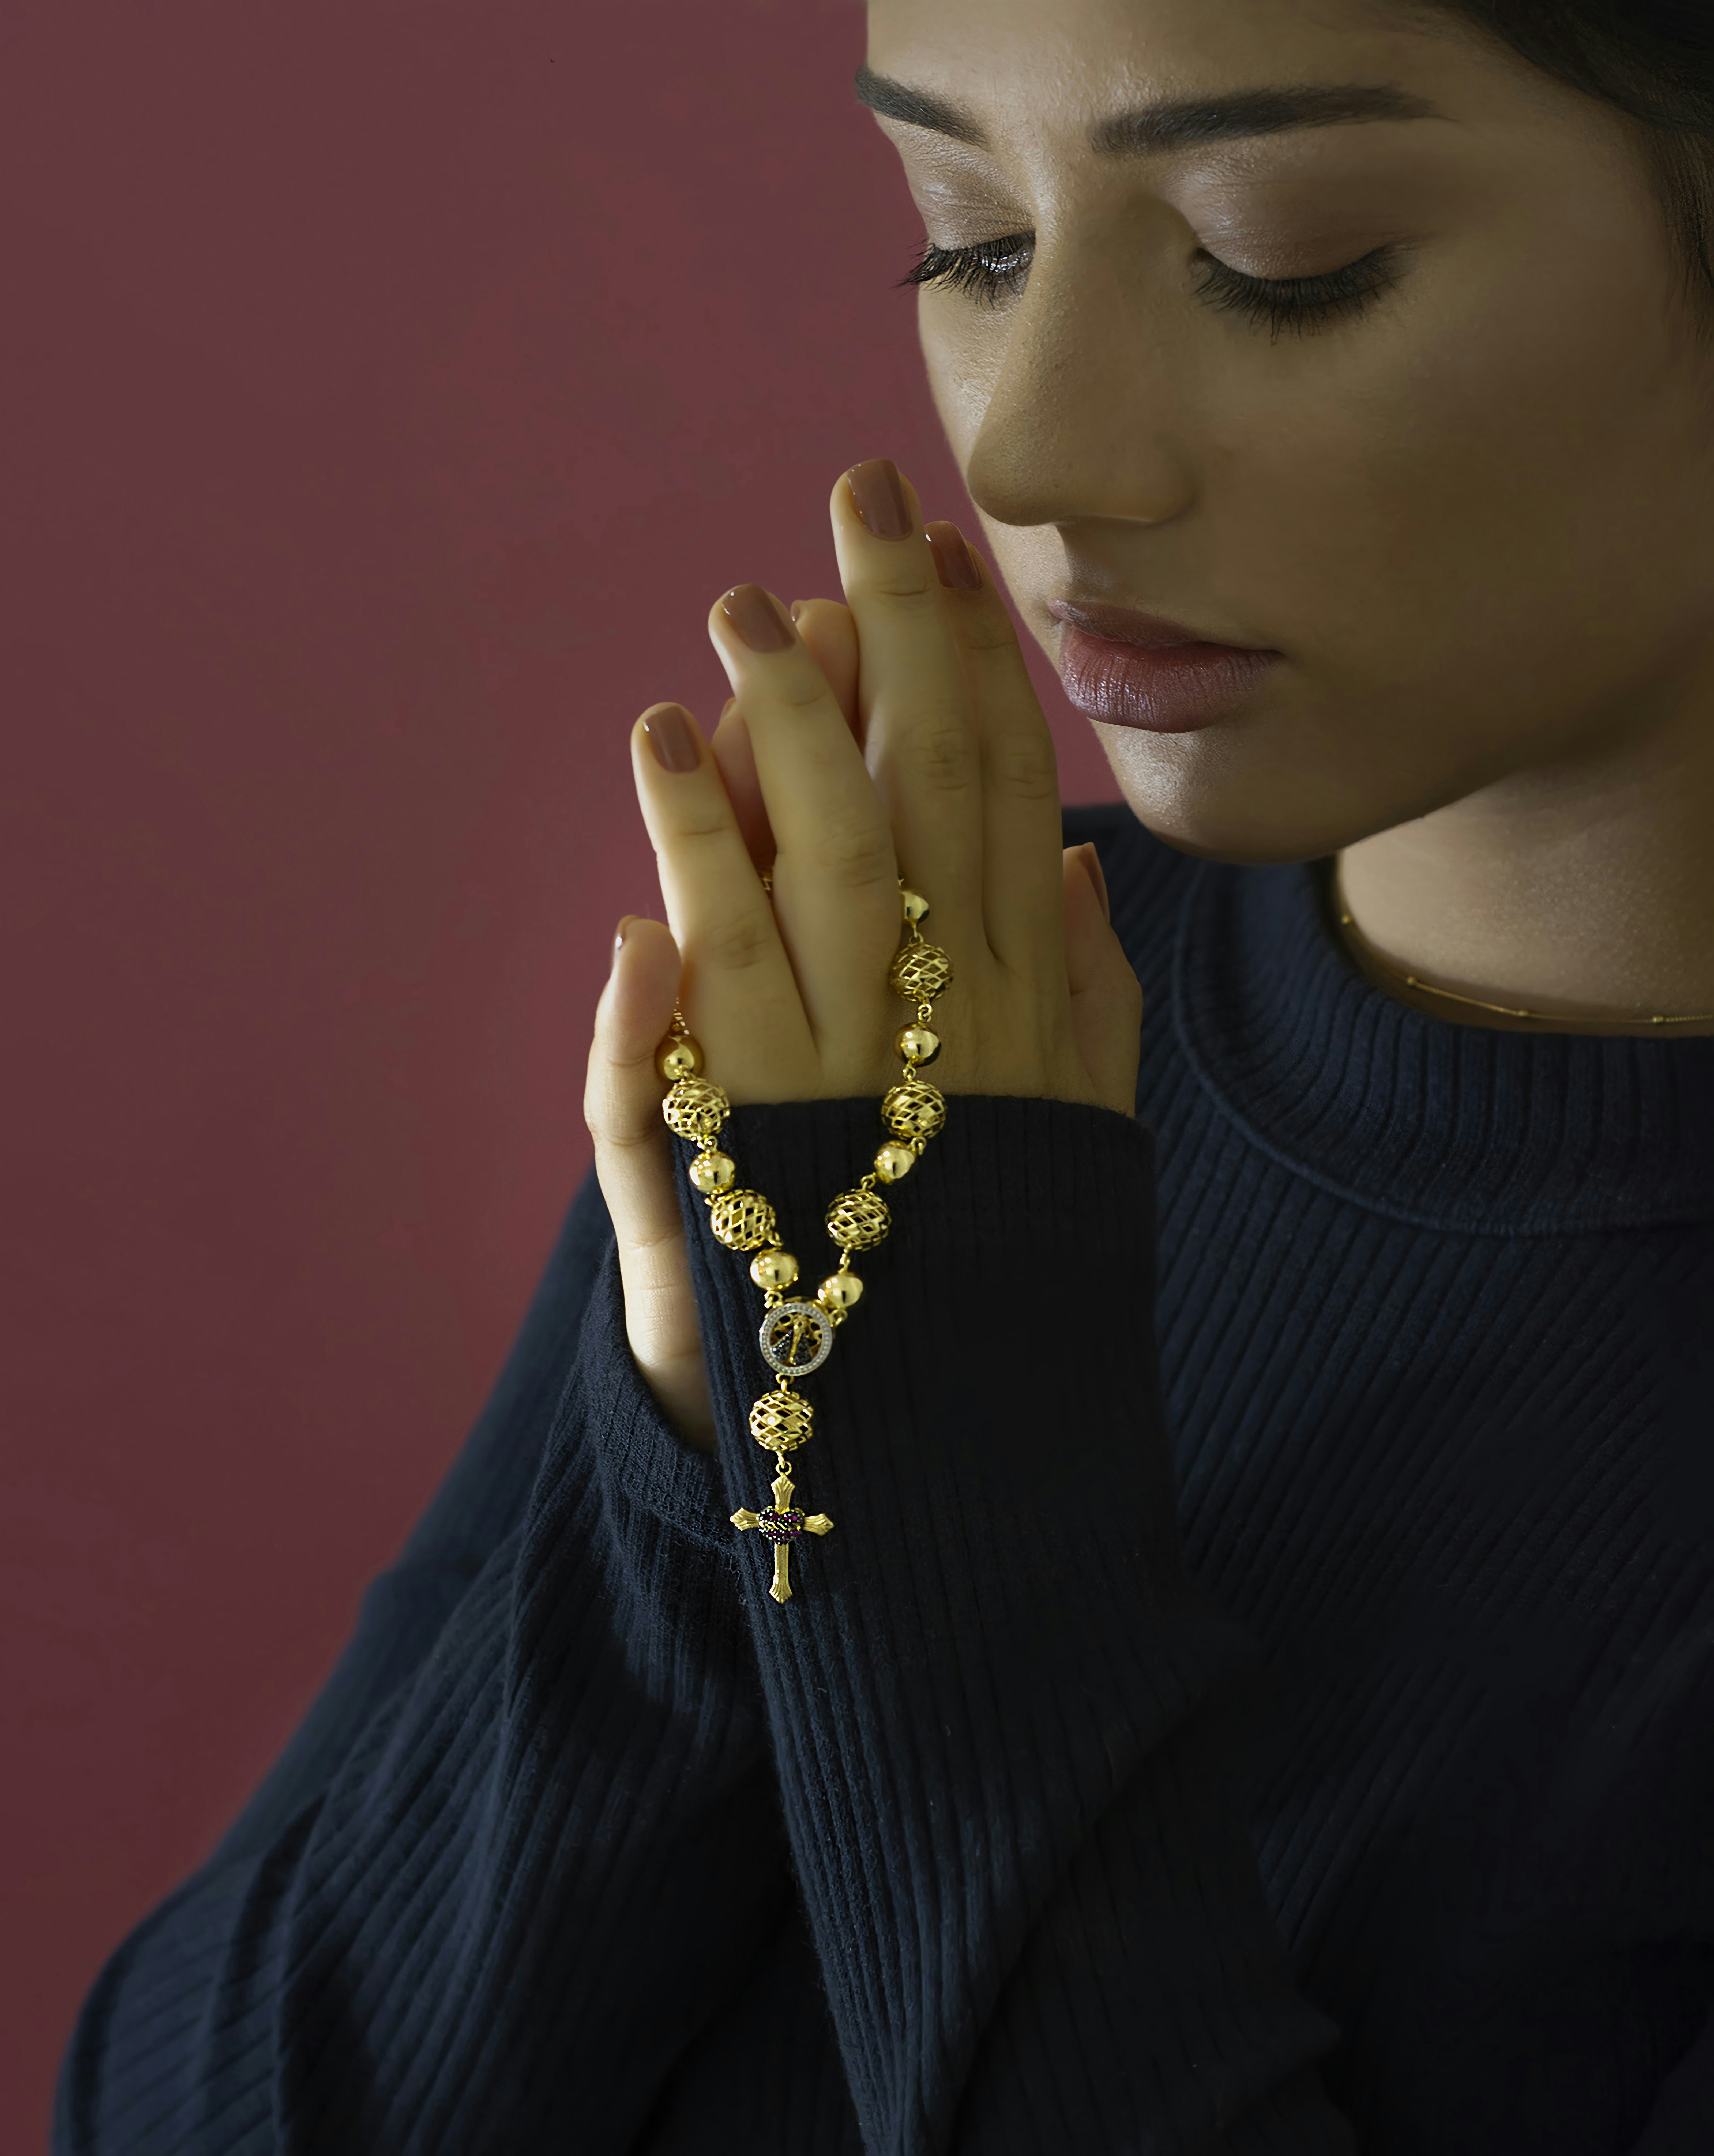 Girl holding a third and praying.